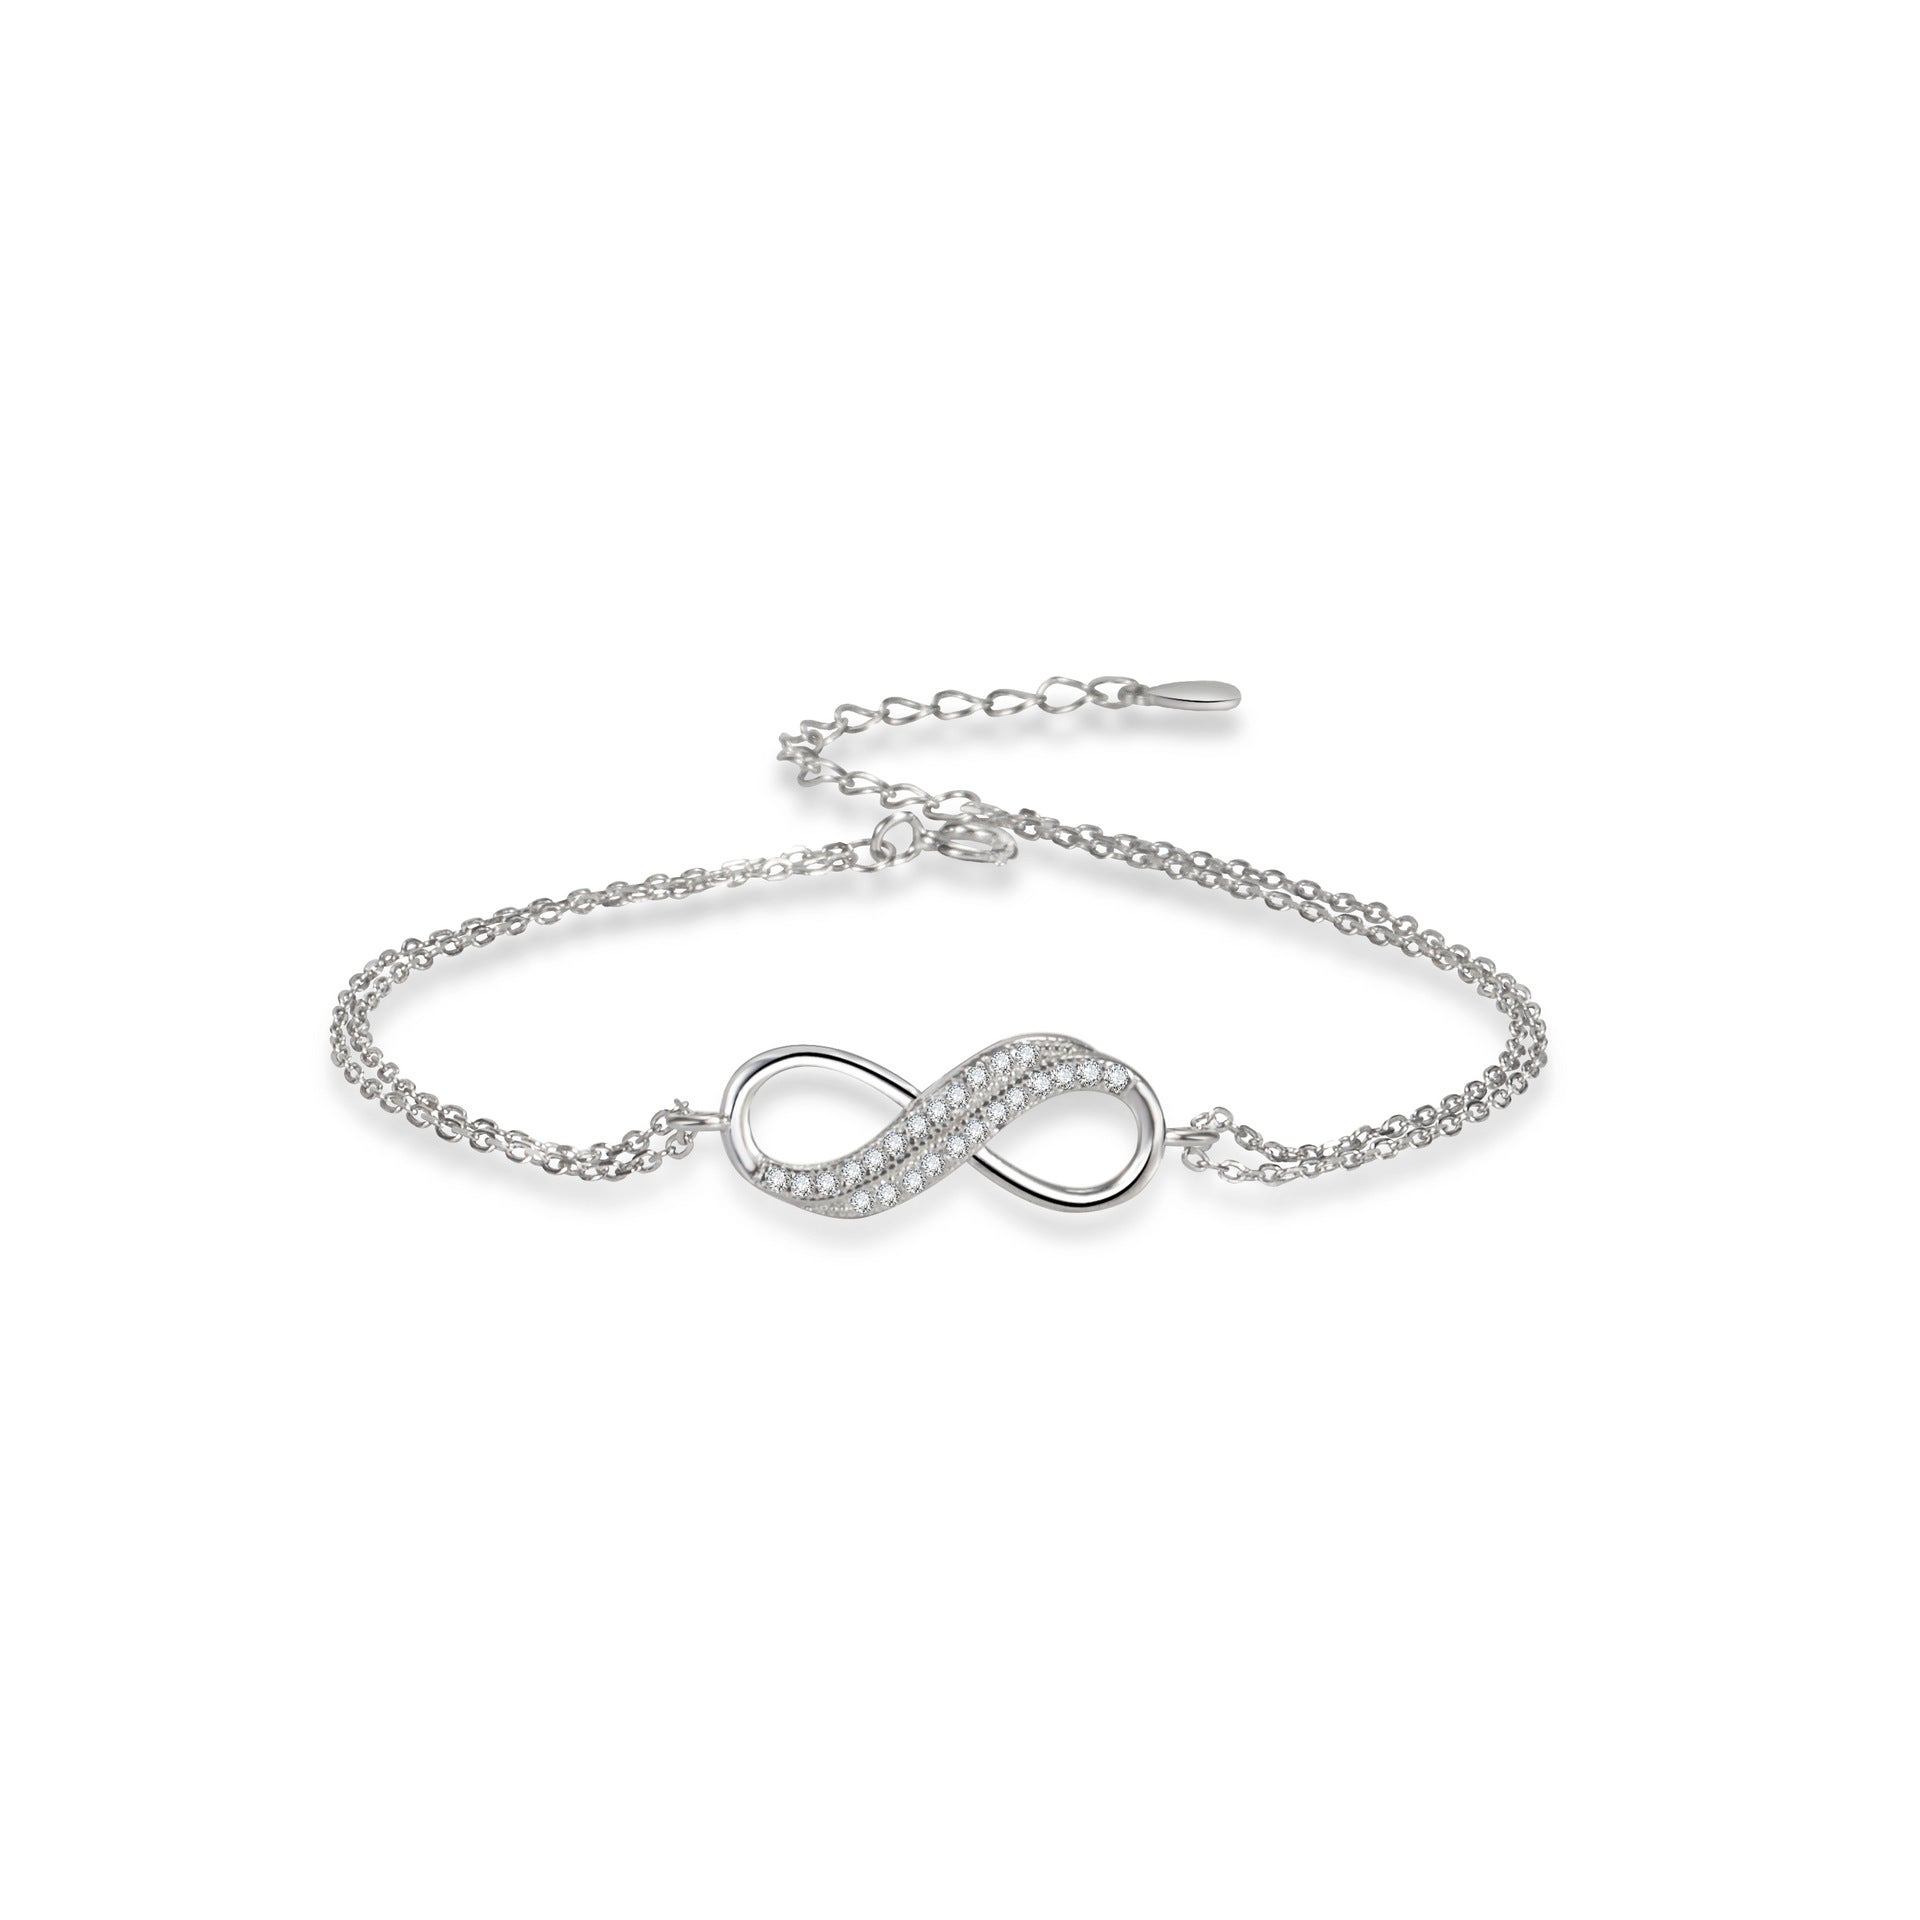 Women's Fashion Personality Sterling Silver Number 8 Bracelet